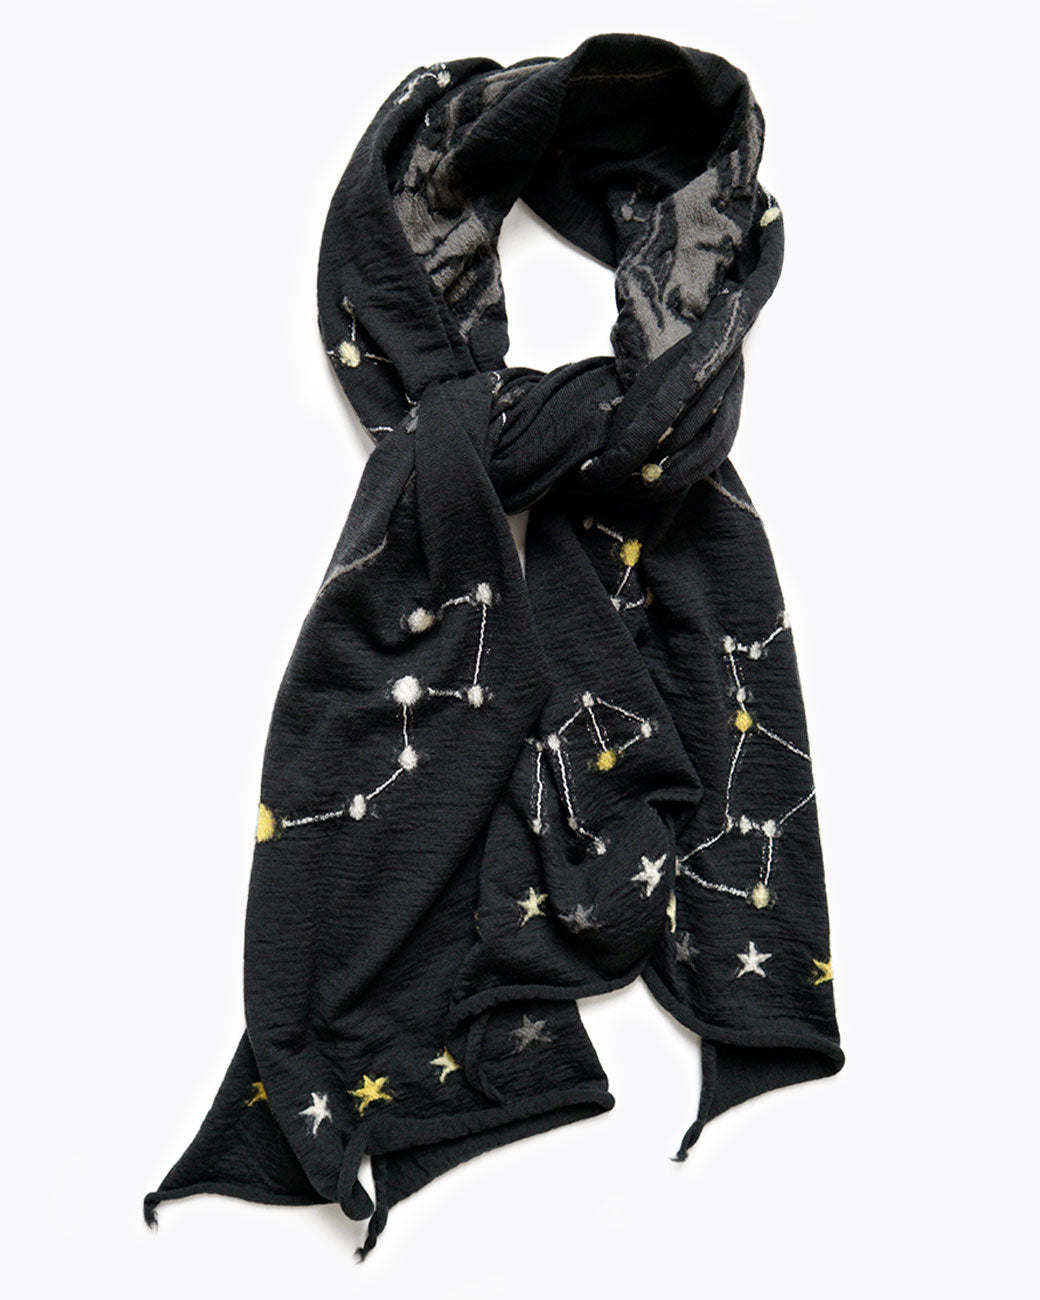 Kapital constellation scarf in black, shown wrapped up.